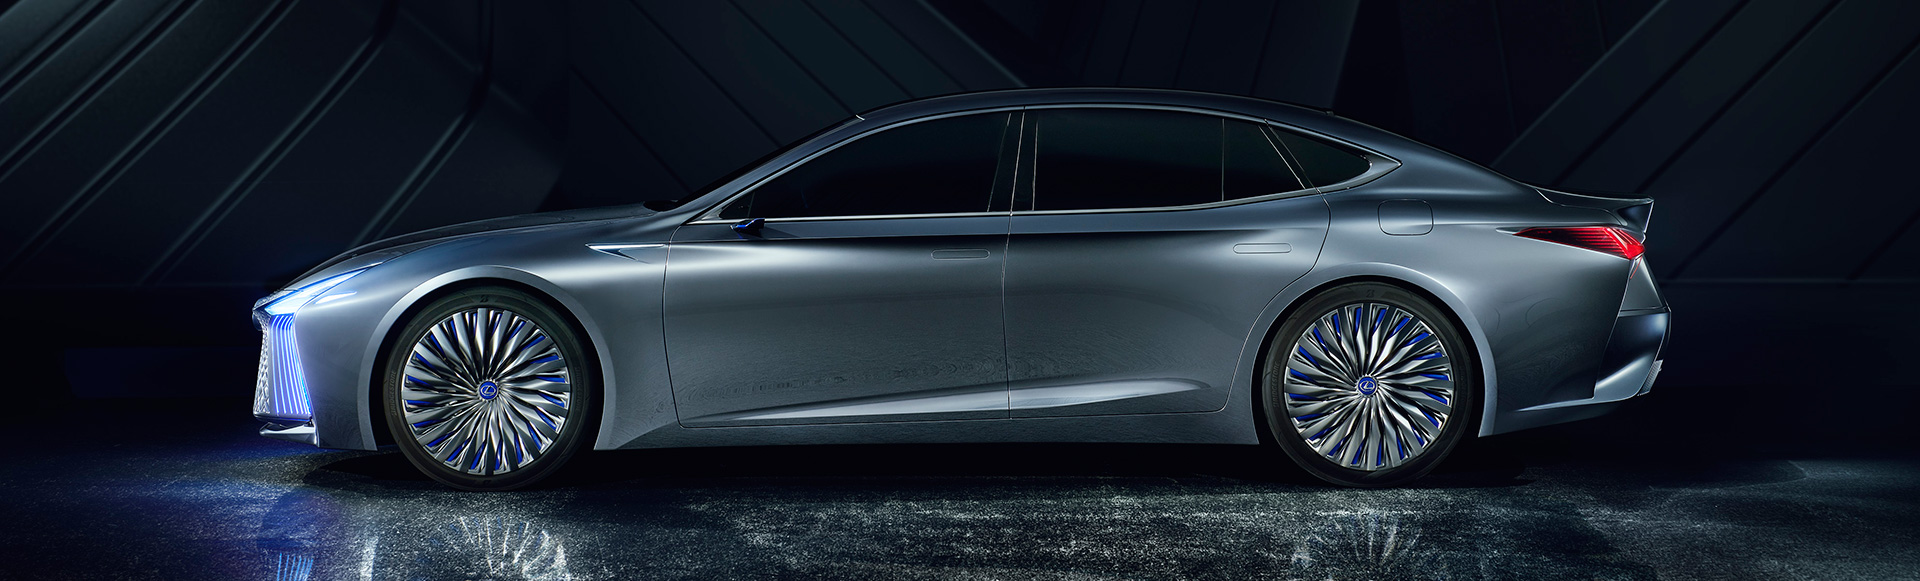 Lexus Premieres 'LS+ Concept' Flagship with Eye toward Application of Automated Driving Technologies in 2020